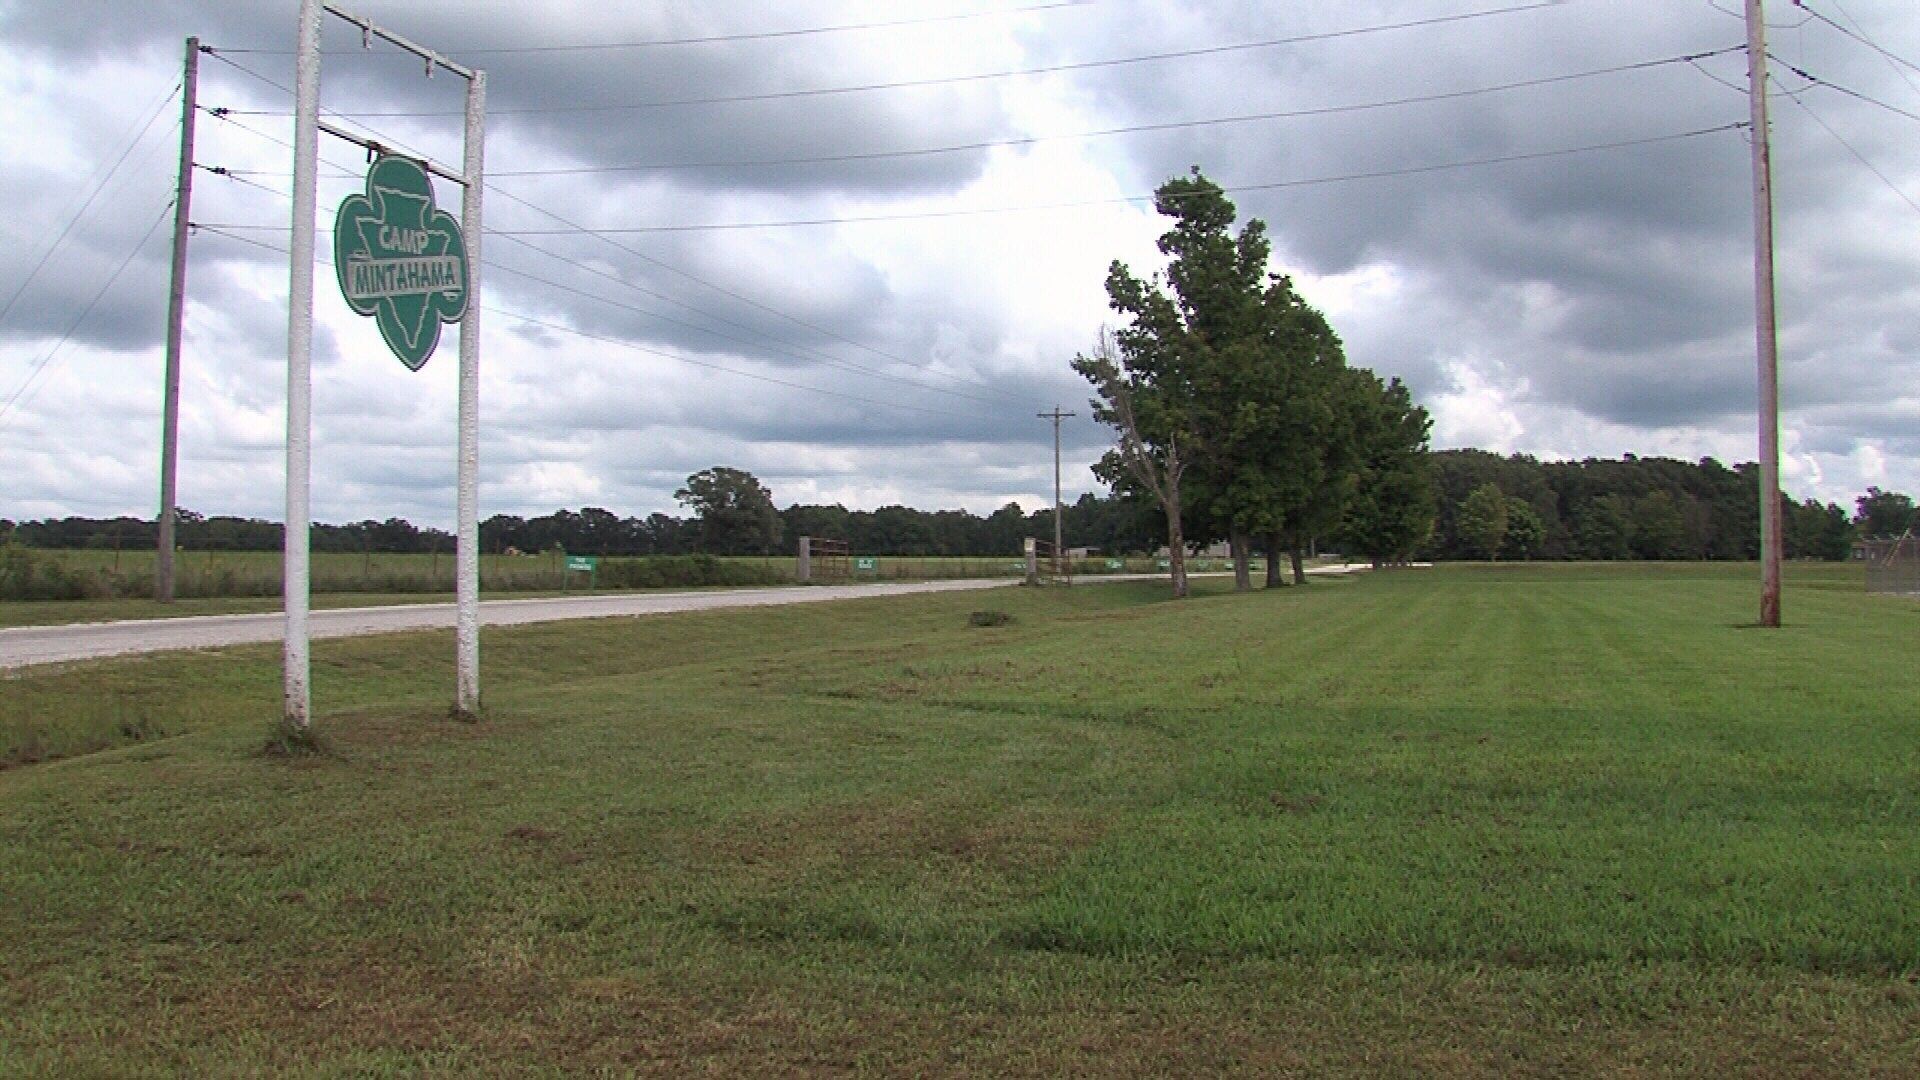 Local Girl Scout Camp to Close, Friends Propose Different Option News koamnewsnow image